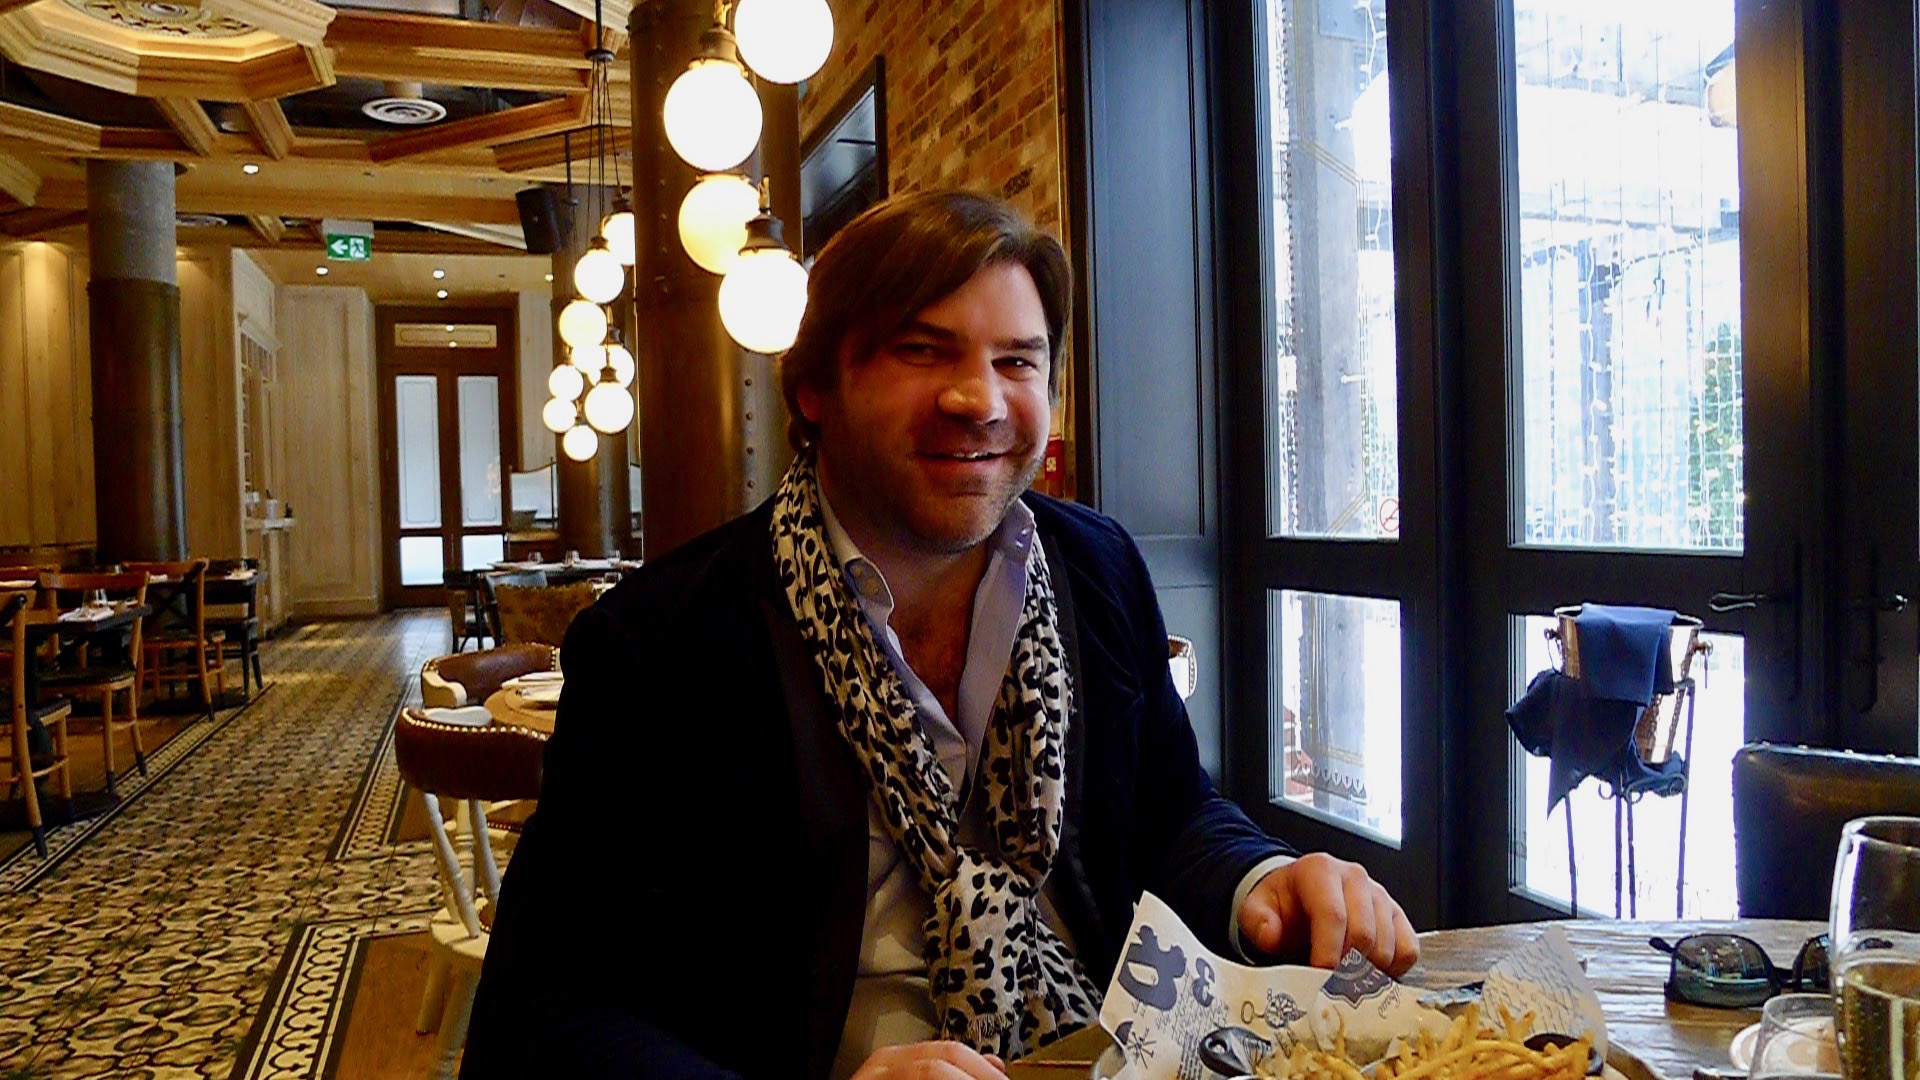 Lunch at Toronto's Cluny Bistro with the charmingly effusive Jean-Remy Rapeneau.